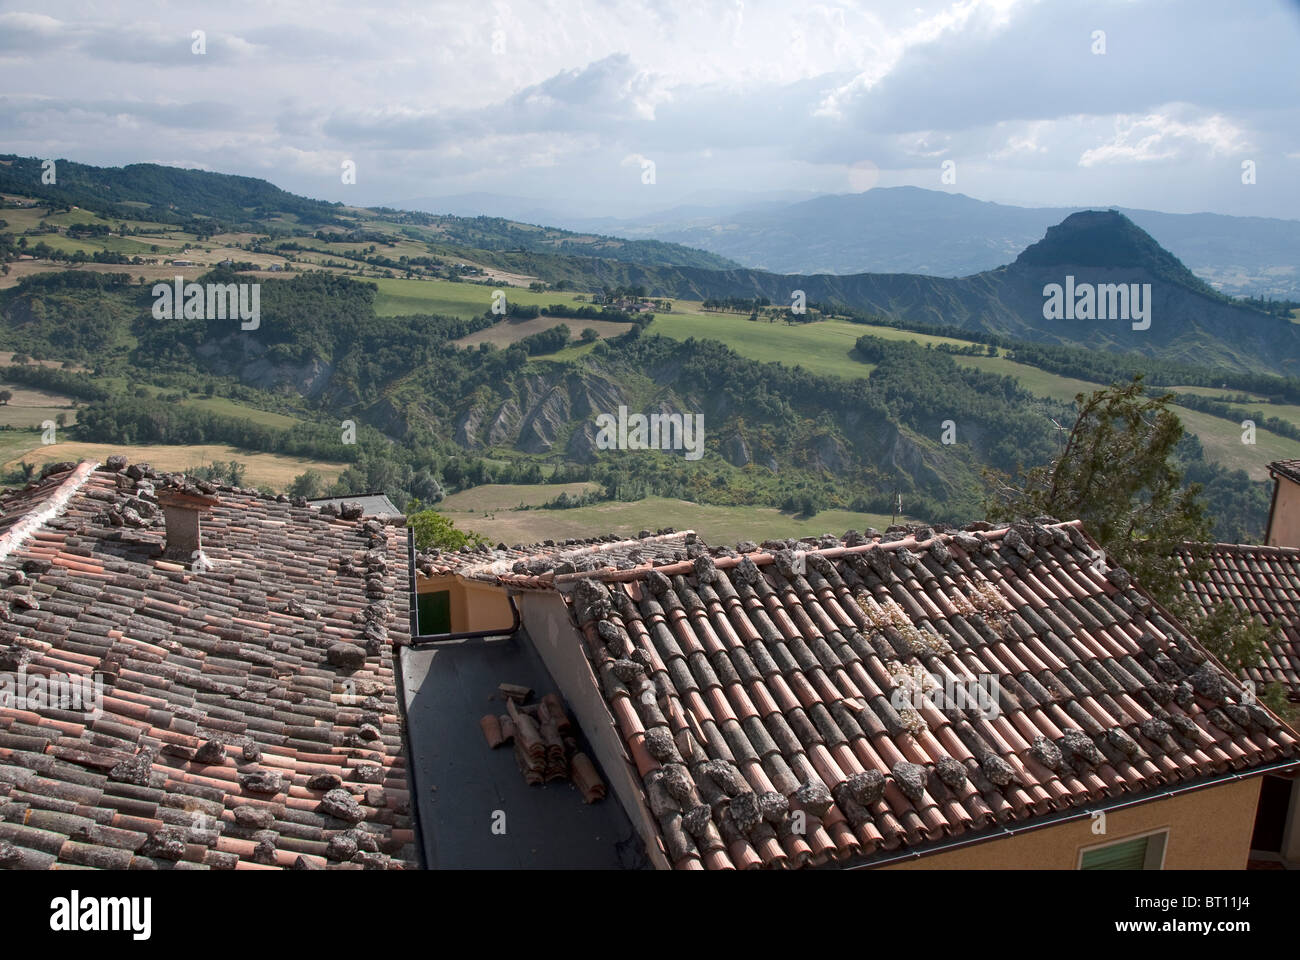 Panorama across the roofs of houses in the fortress town of San Leo, to the Appenine mountains of Le Marche. Stock Photo